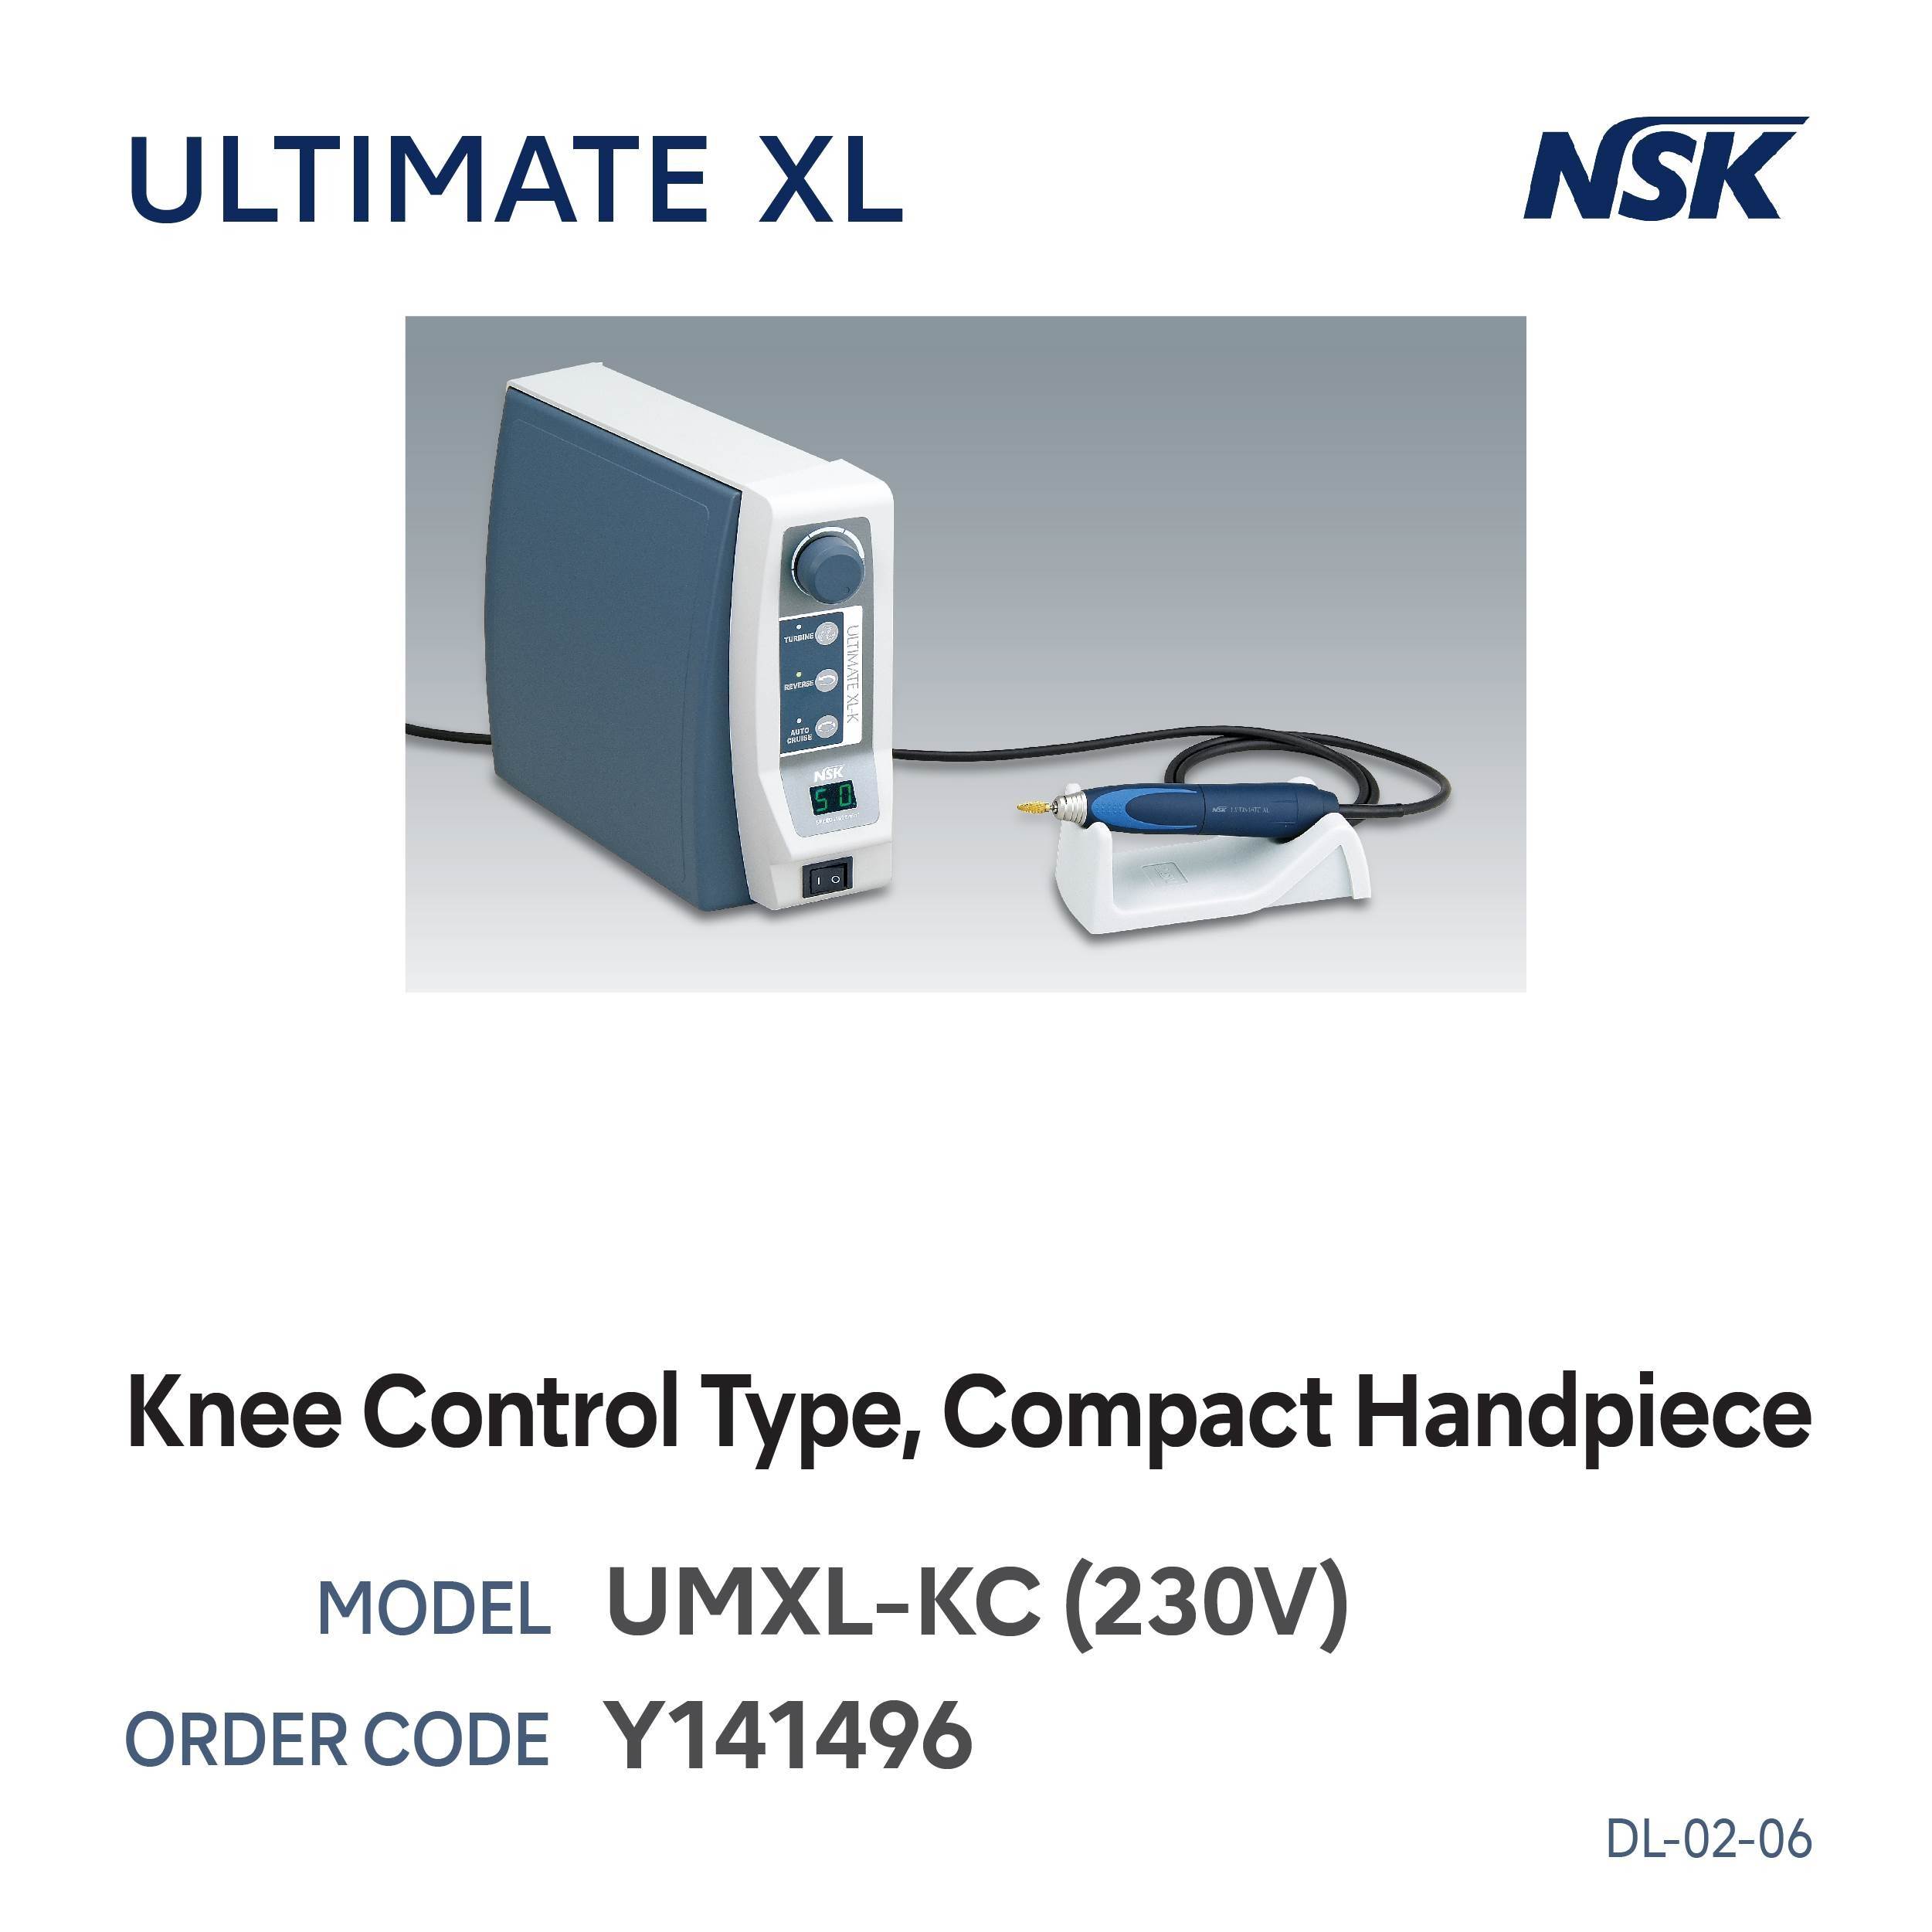 ULTIMATE XL KNEE CONTROL TYPE COMPLETE SET, COMPACT HANDPIECE